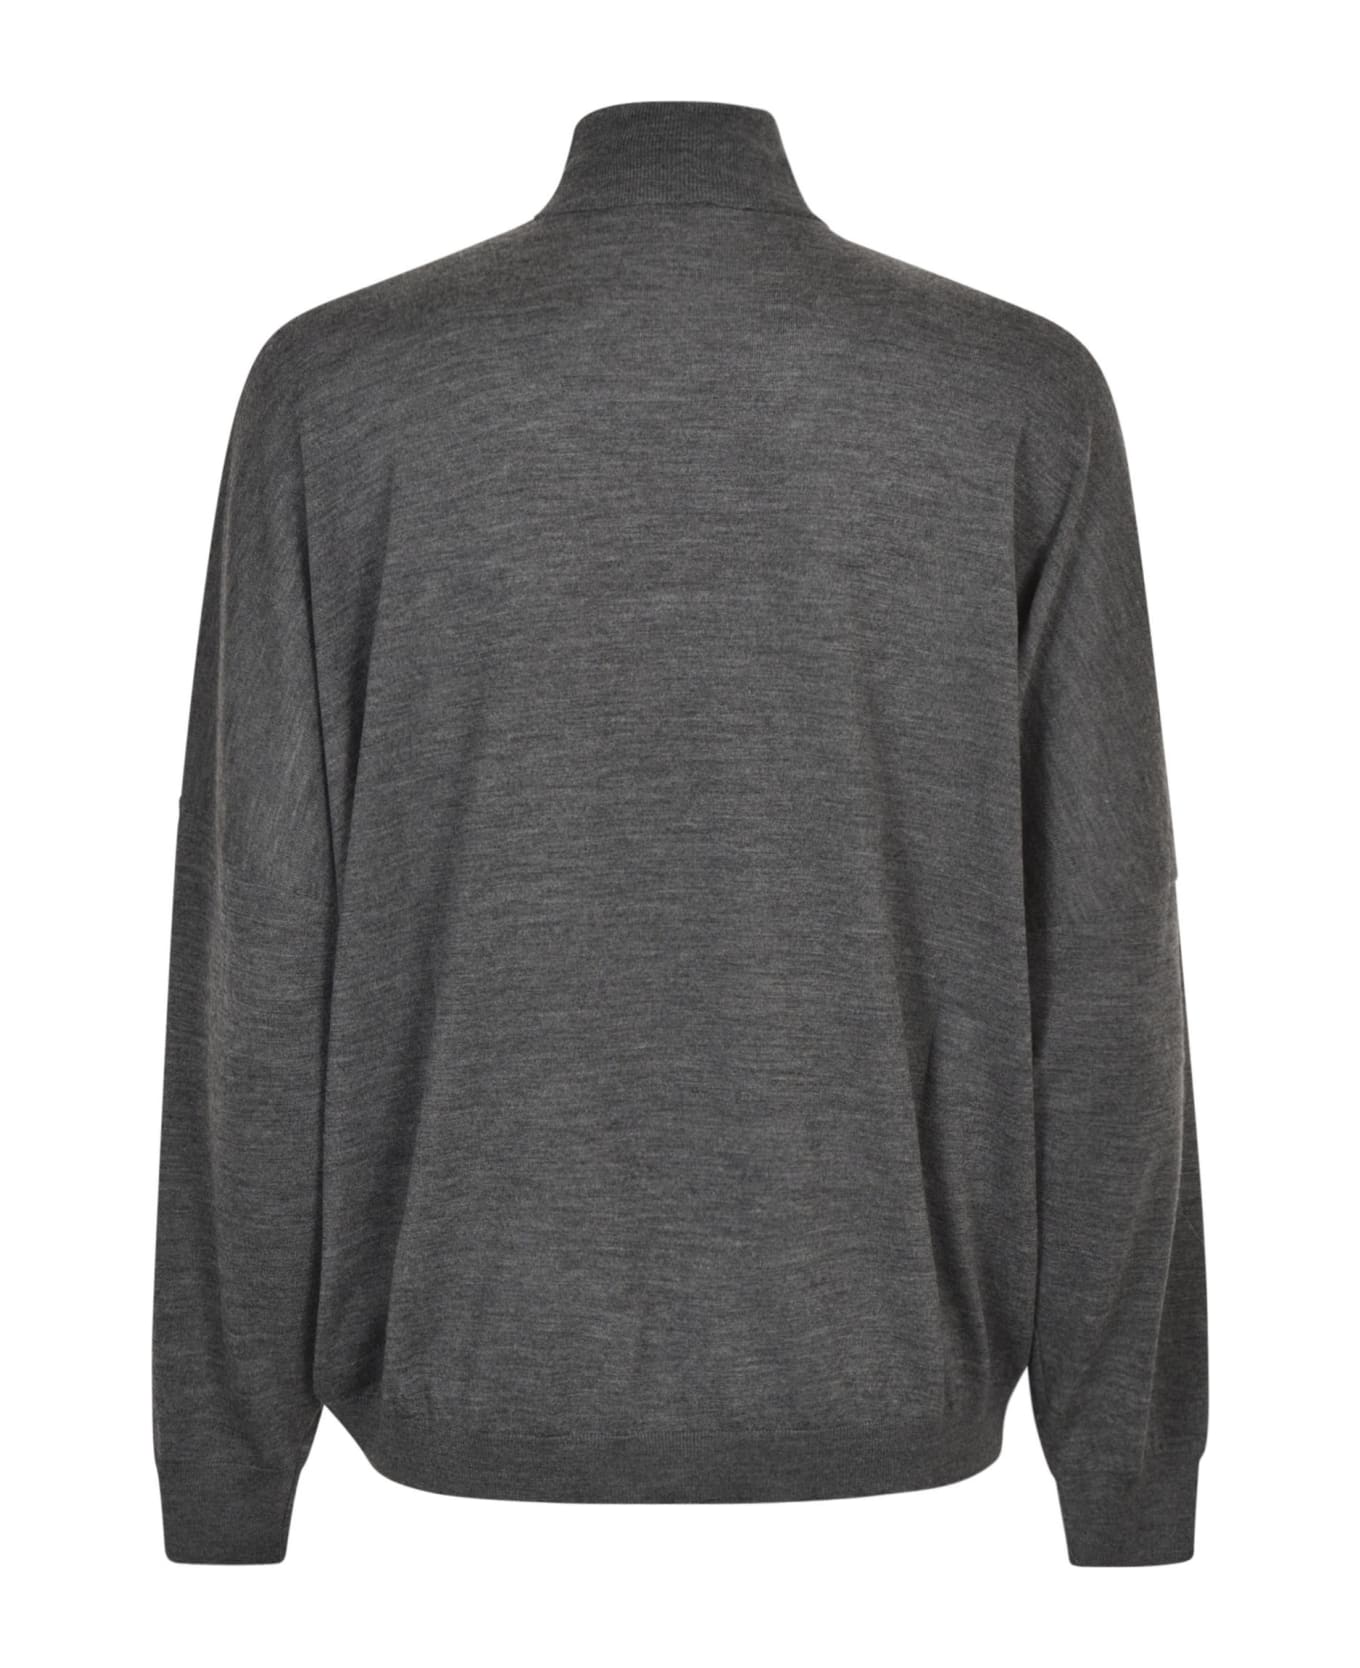 Brunello Cucinelli Cut-out Detail Embellished Sweater - Piombo